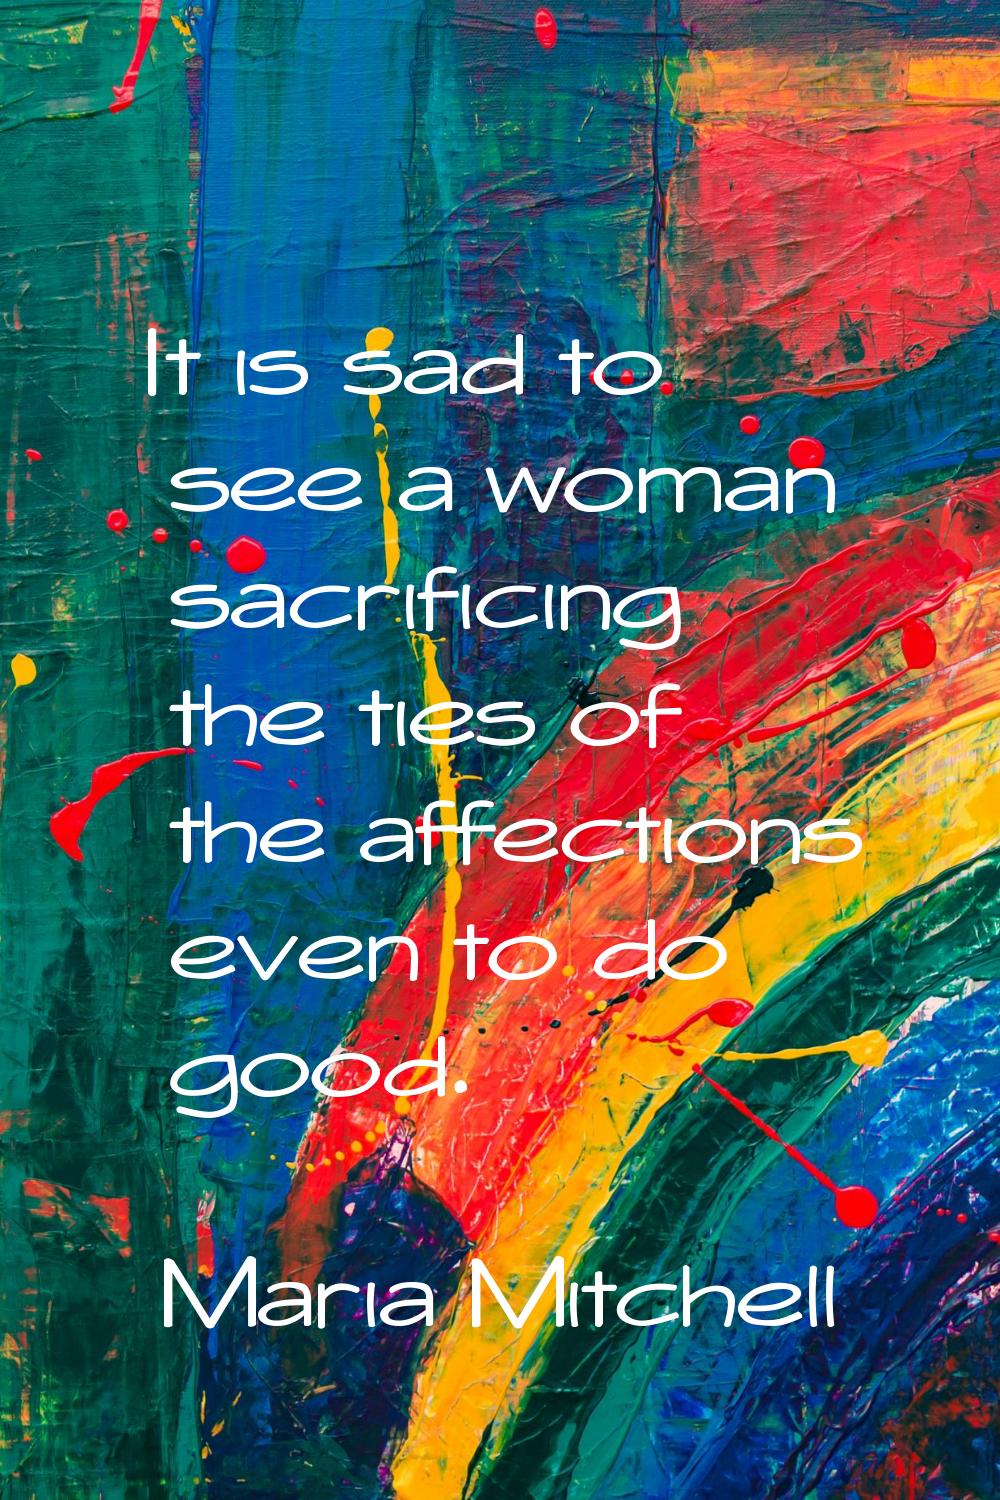 It is sad to see a woman sacrificing the ties of the affections even to do good.